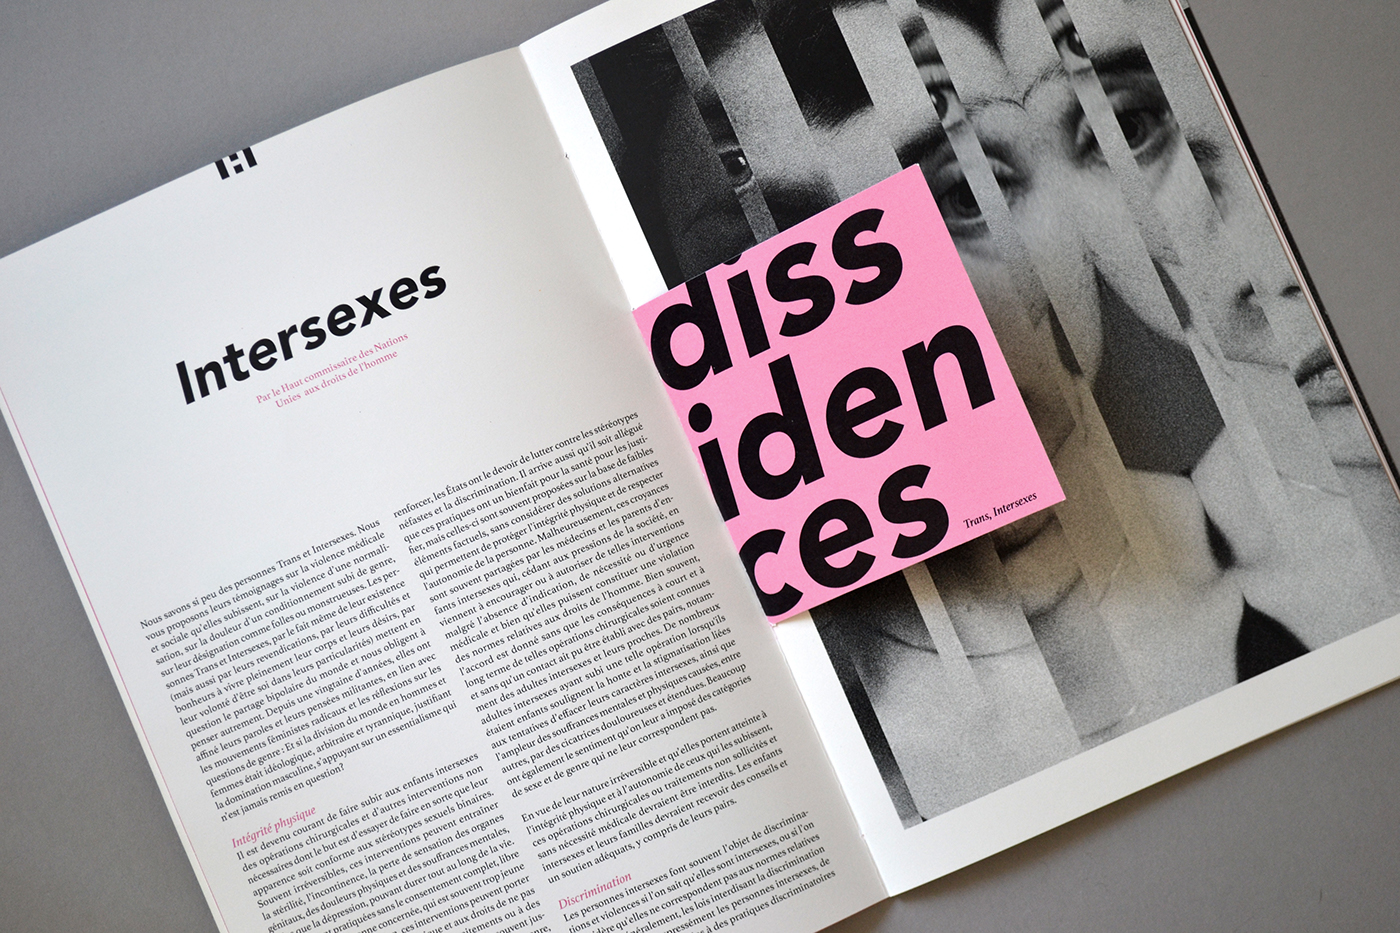 UQAM Typographie collage editorial magazine font mag pink student